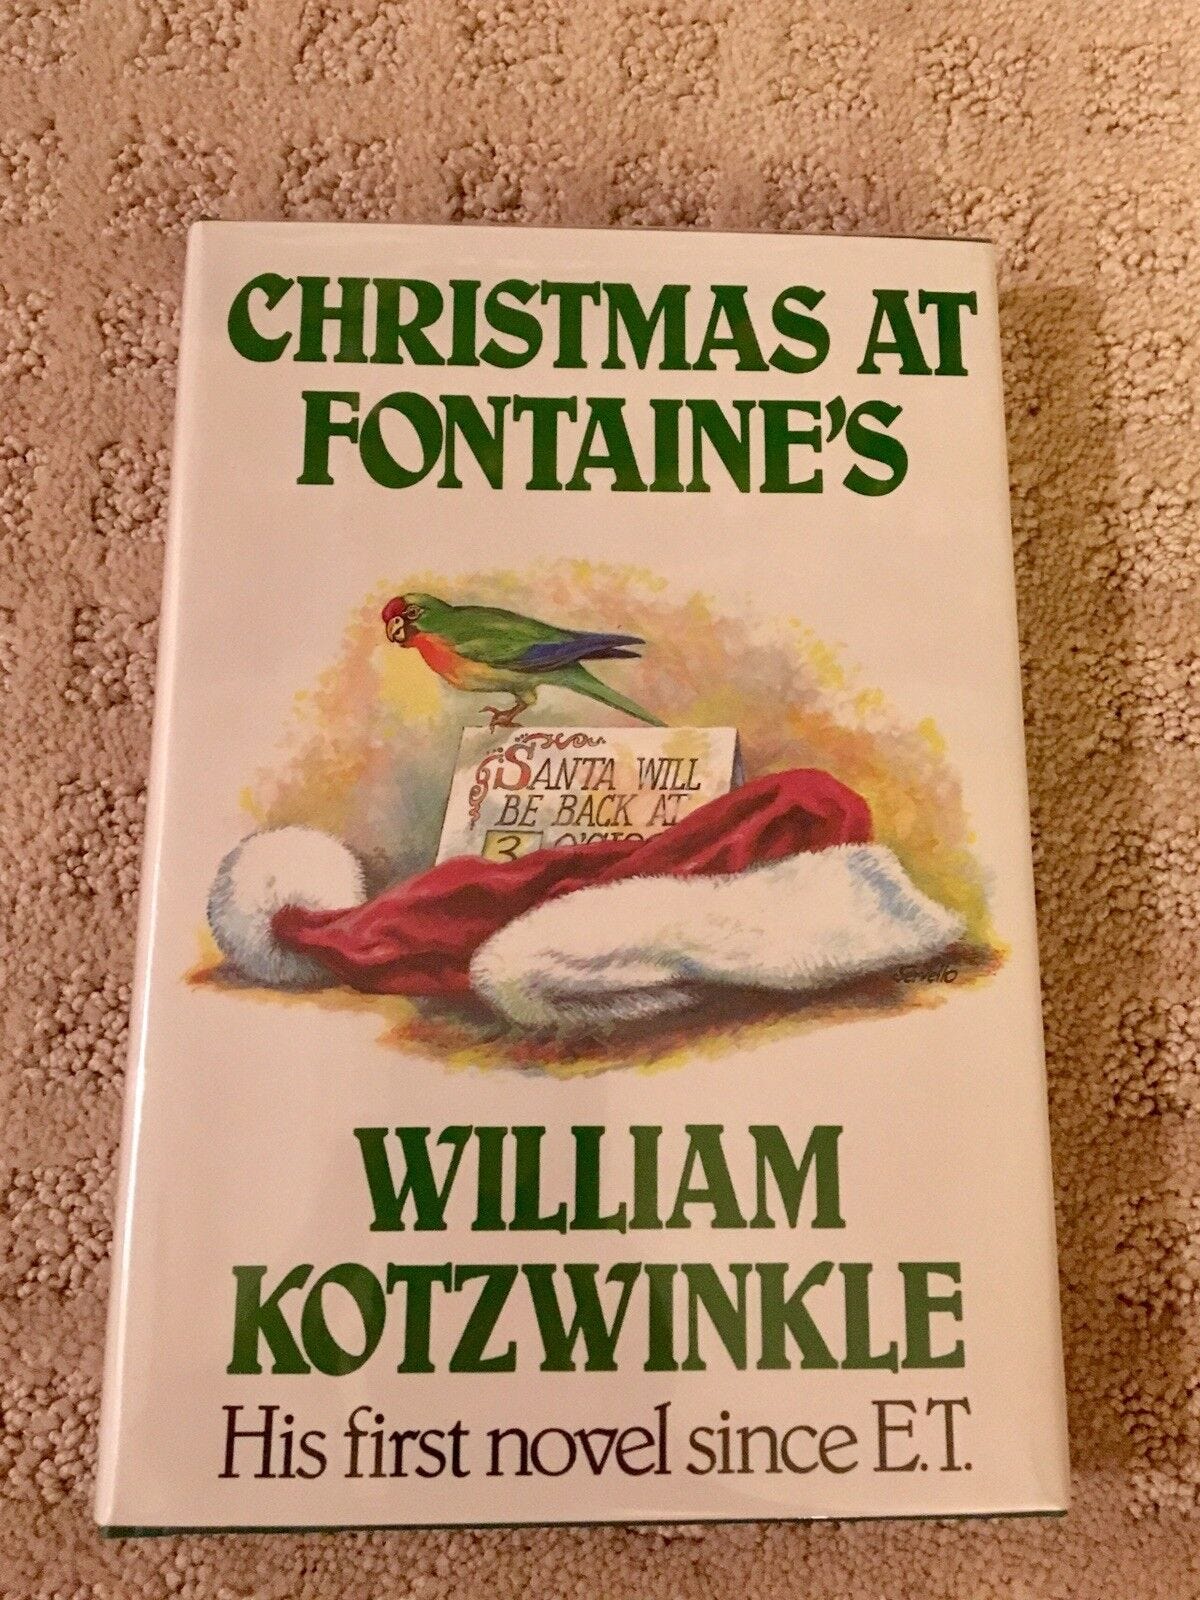 Christmas at Fontaine's by William Kotzwinkle (1982, Other) for sale online  | eBay